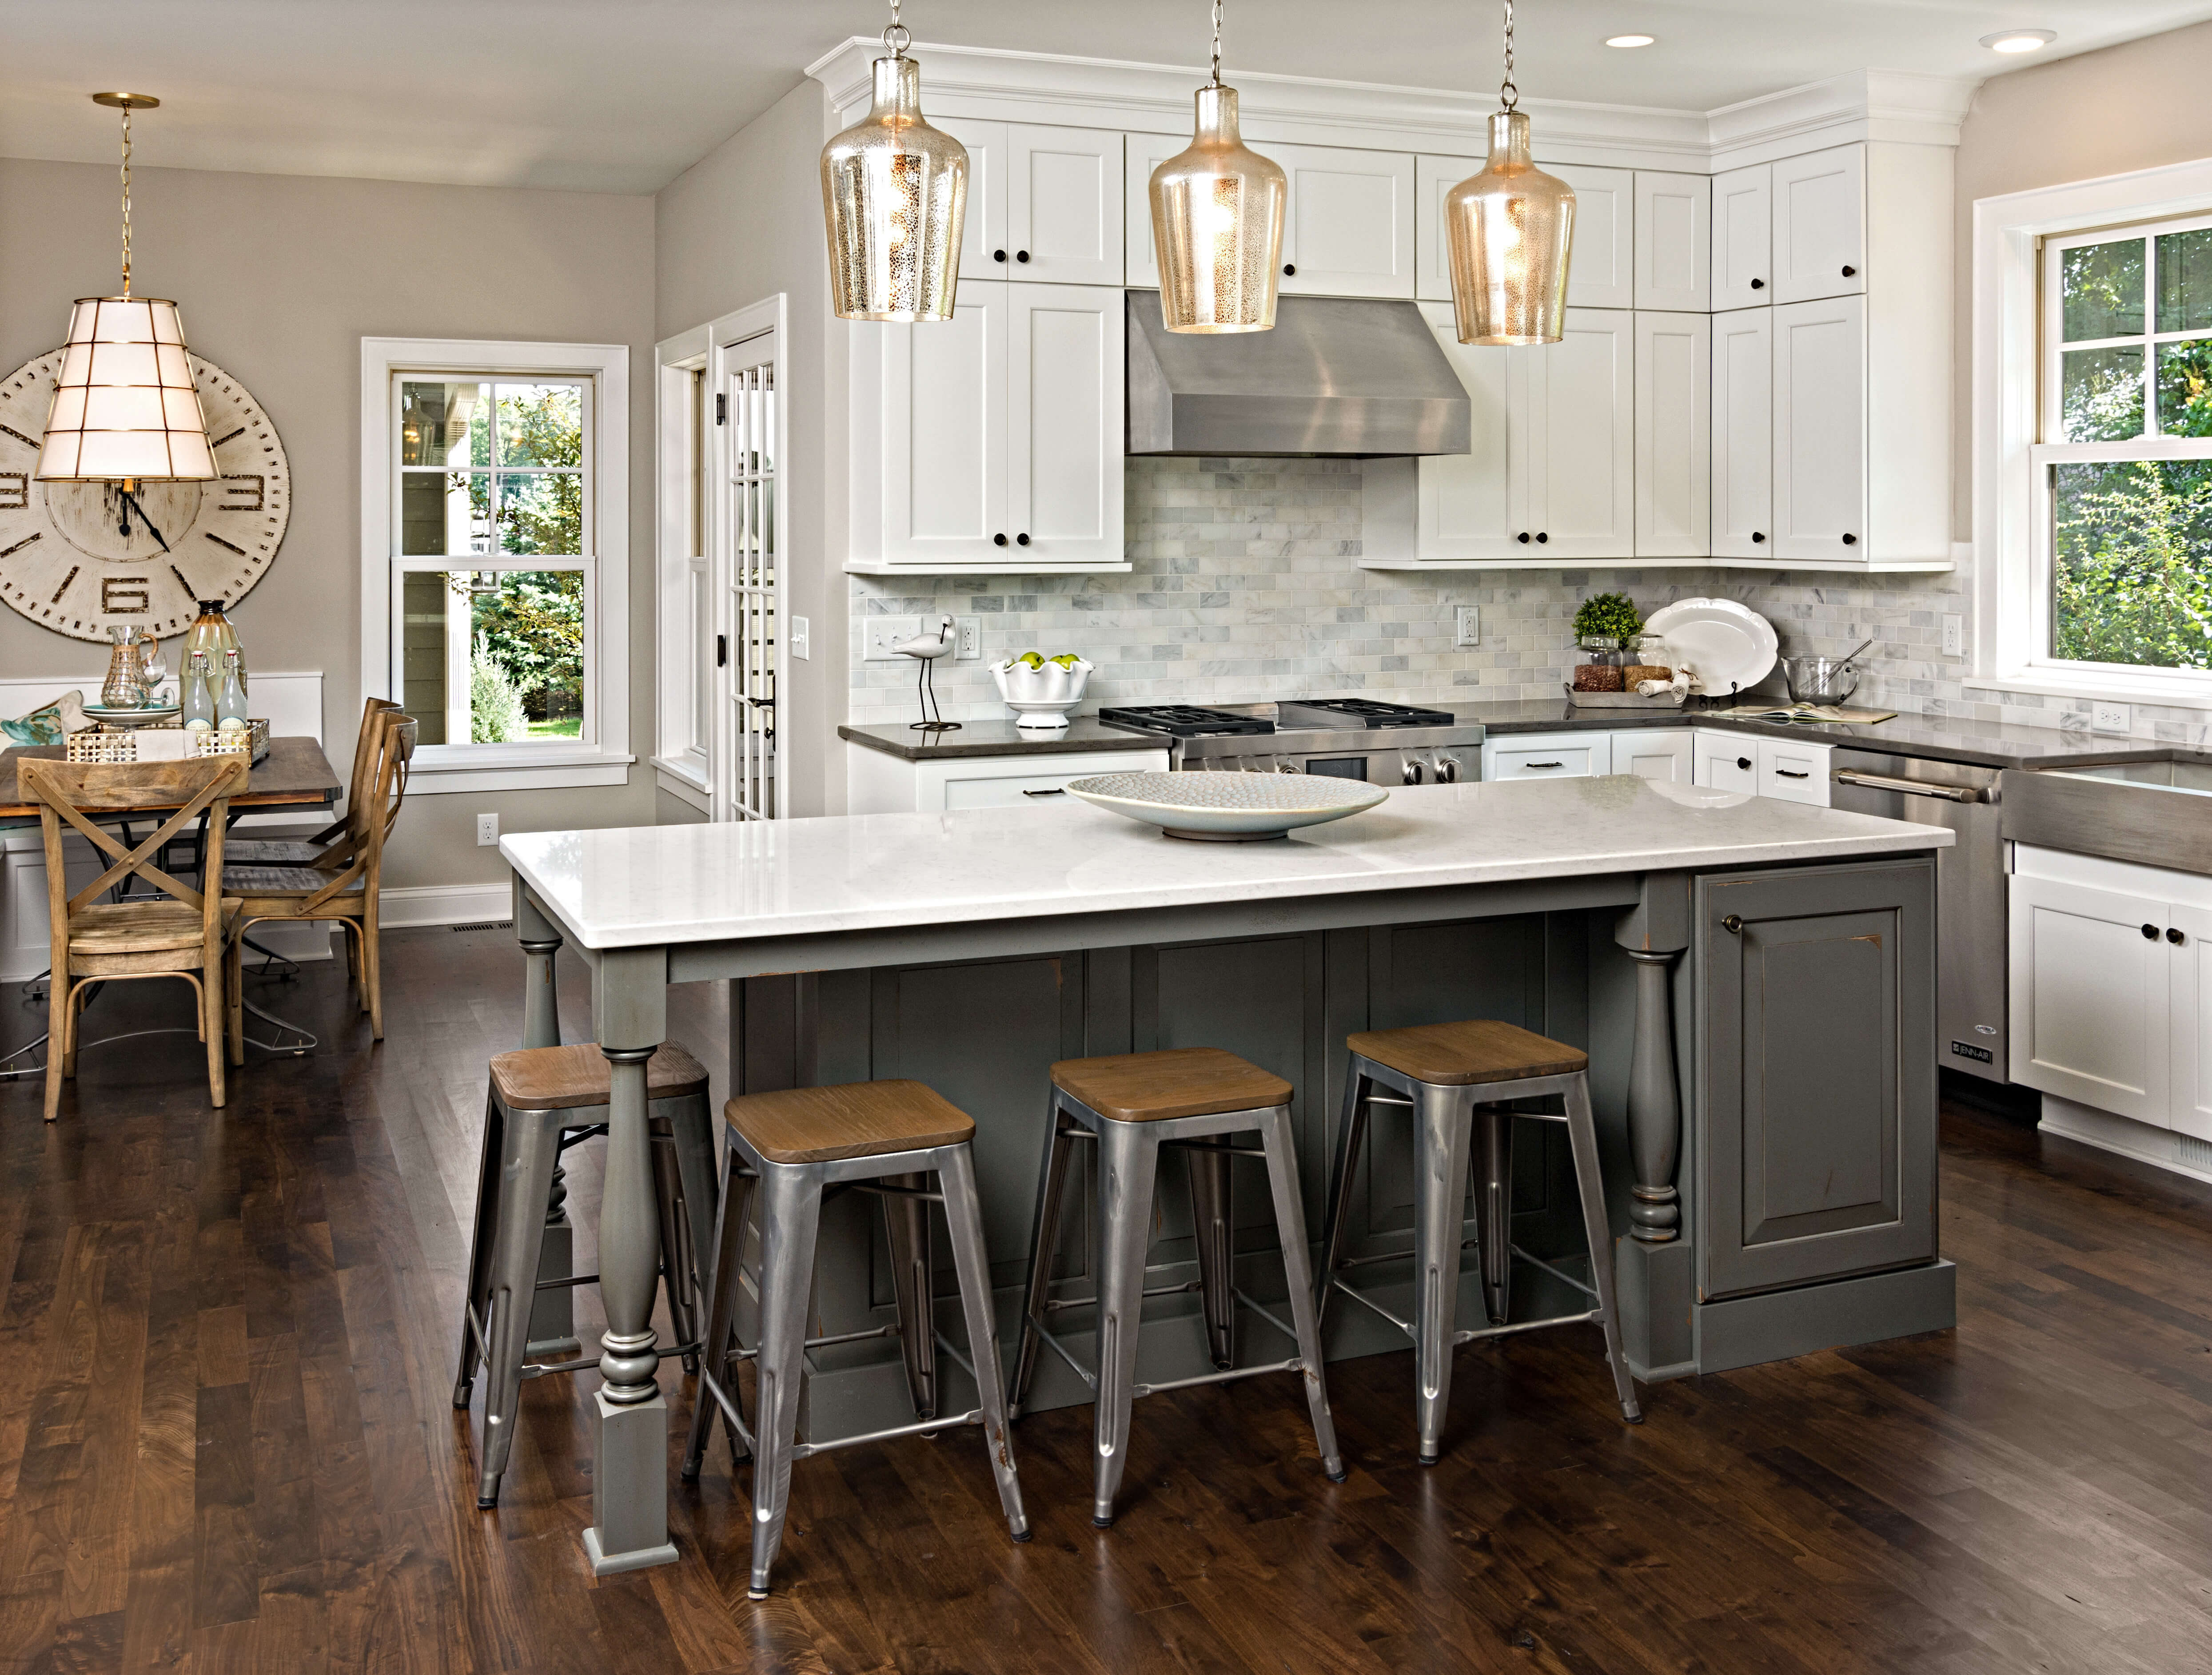 Dura Supreme Cabinetry kitchen featuring a kitchen island with a Heritage Paint finish. Kitchen design by Kristen Peck of Knight Construction Design, Inc., Minnesota.